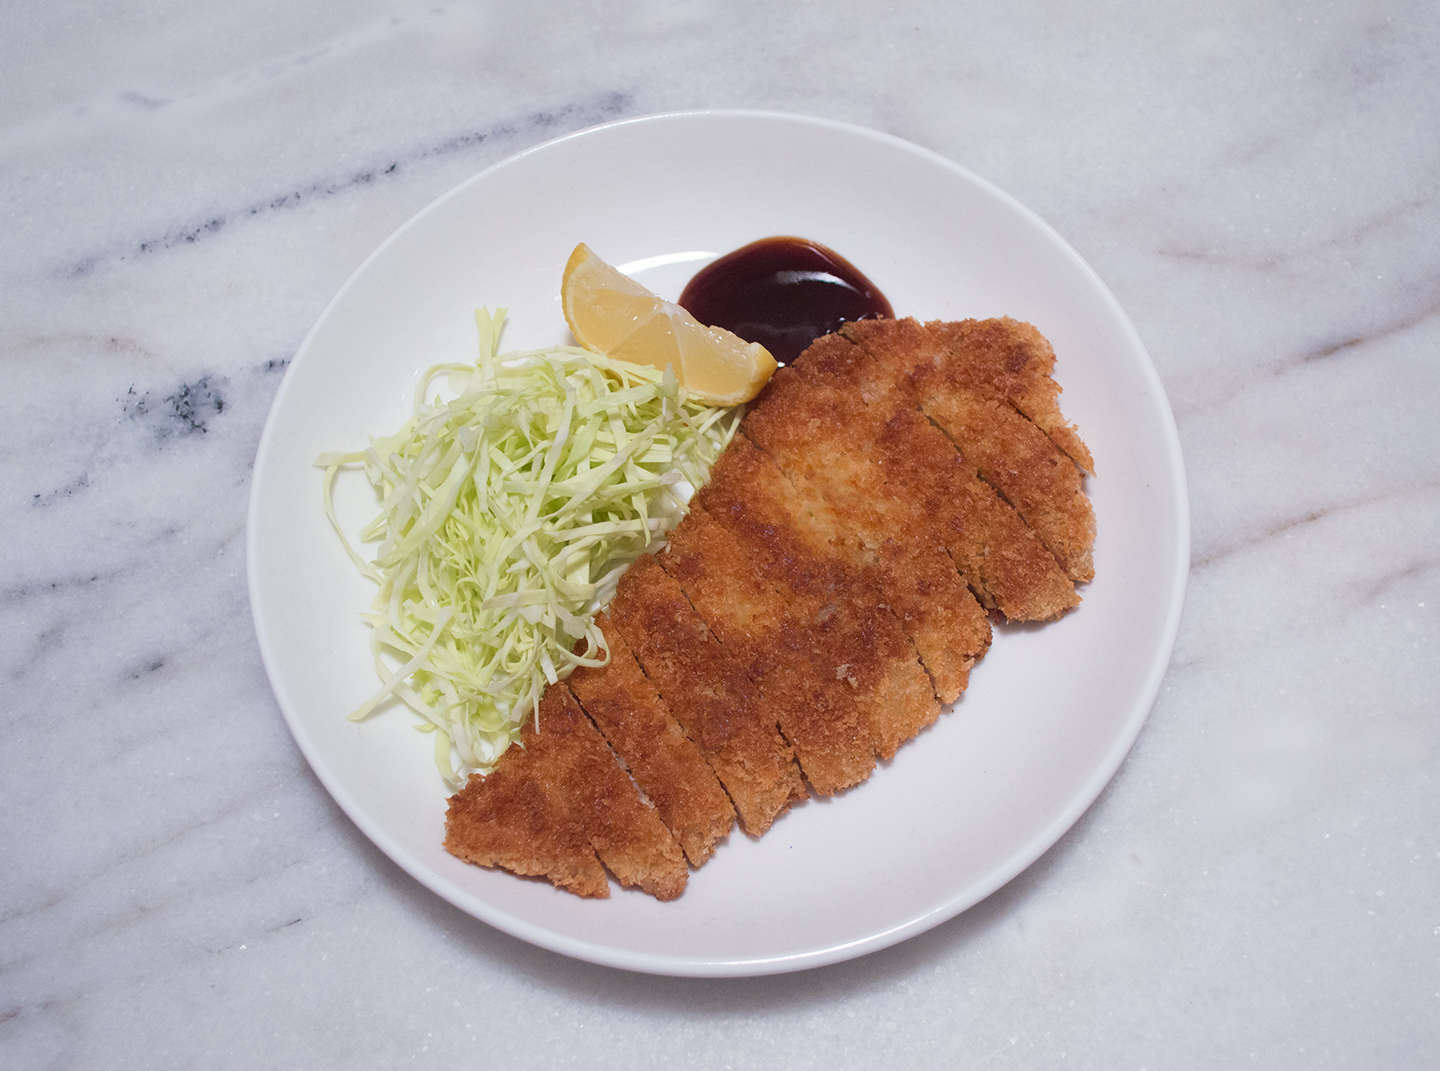 Tonkatsu (豚カツ/とんかつ) - Fried Pork Cutlet with Cabbage